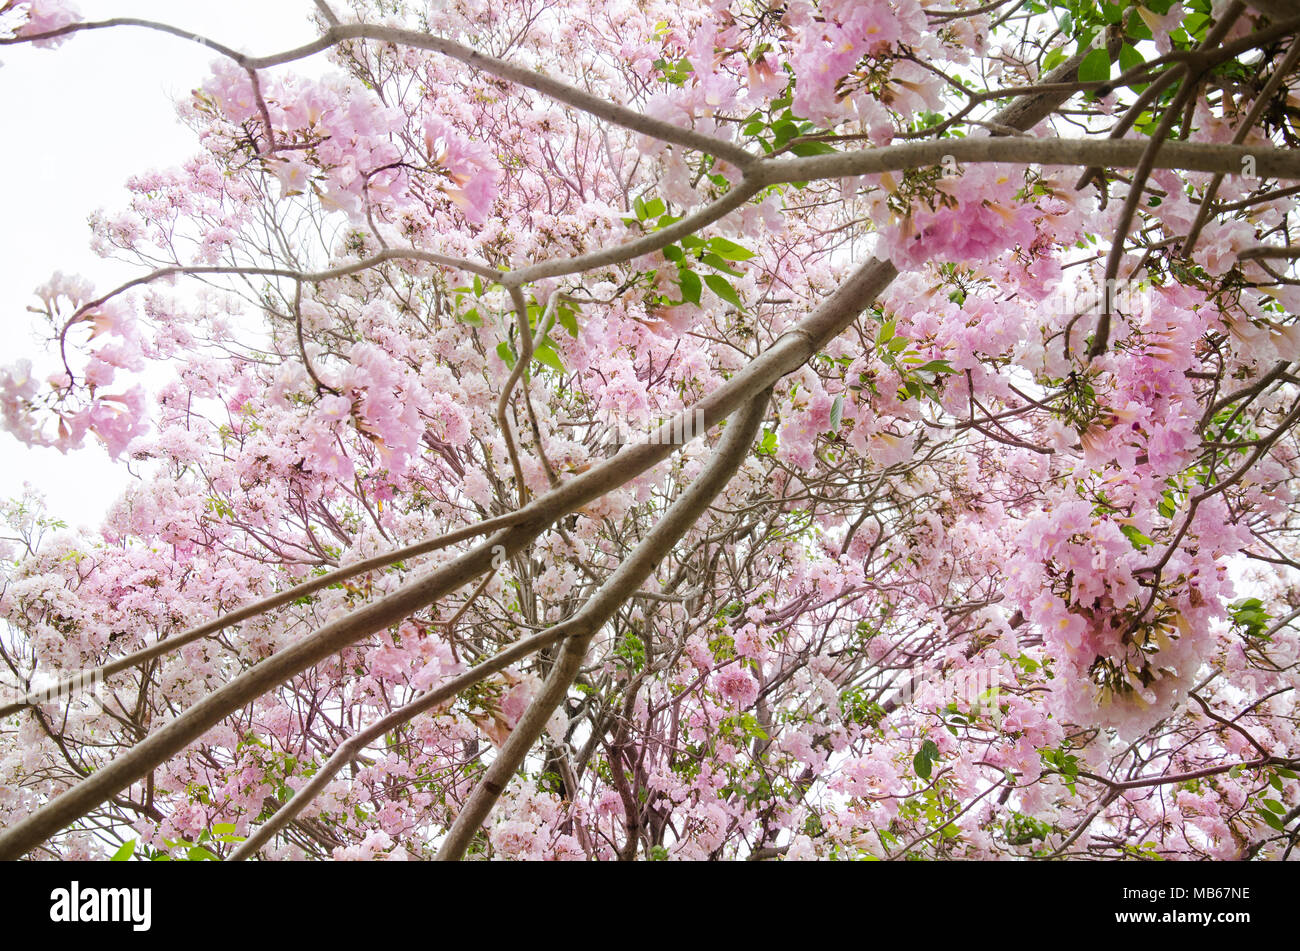 Pink trumpet flowers on branch of tree in garden at Kamphaeng Saen in Nakhon Pathom, Thailand. Stock Photo